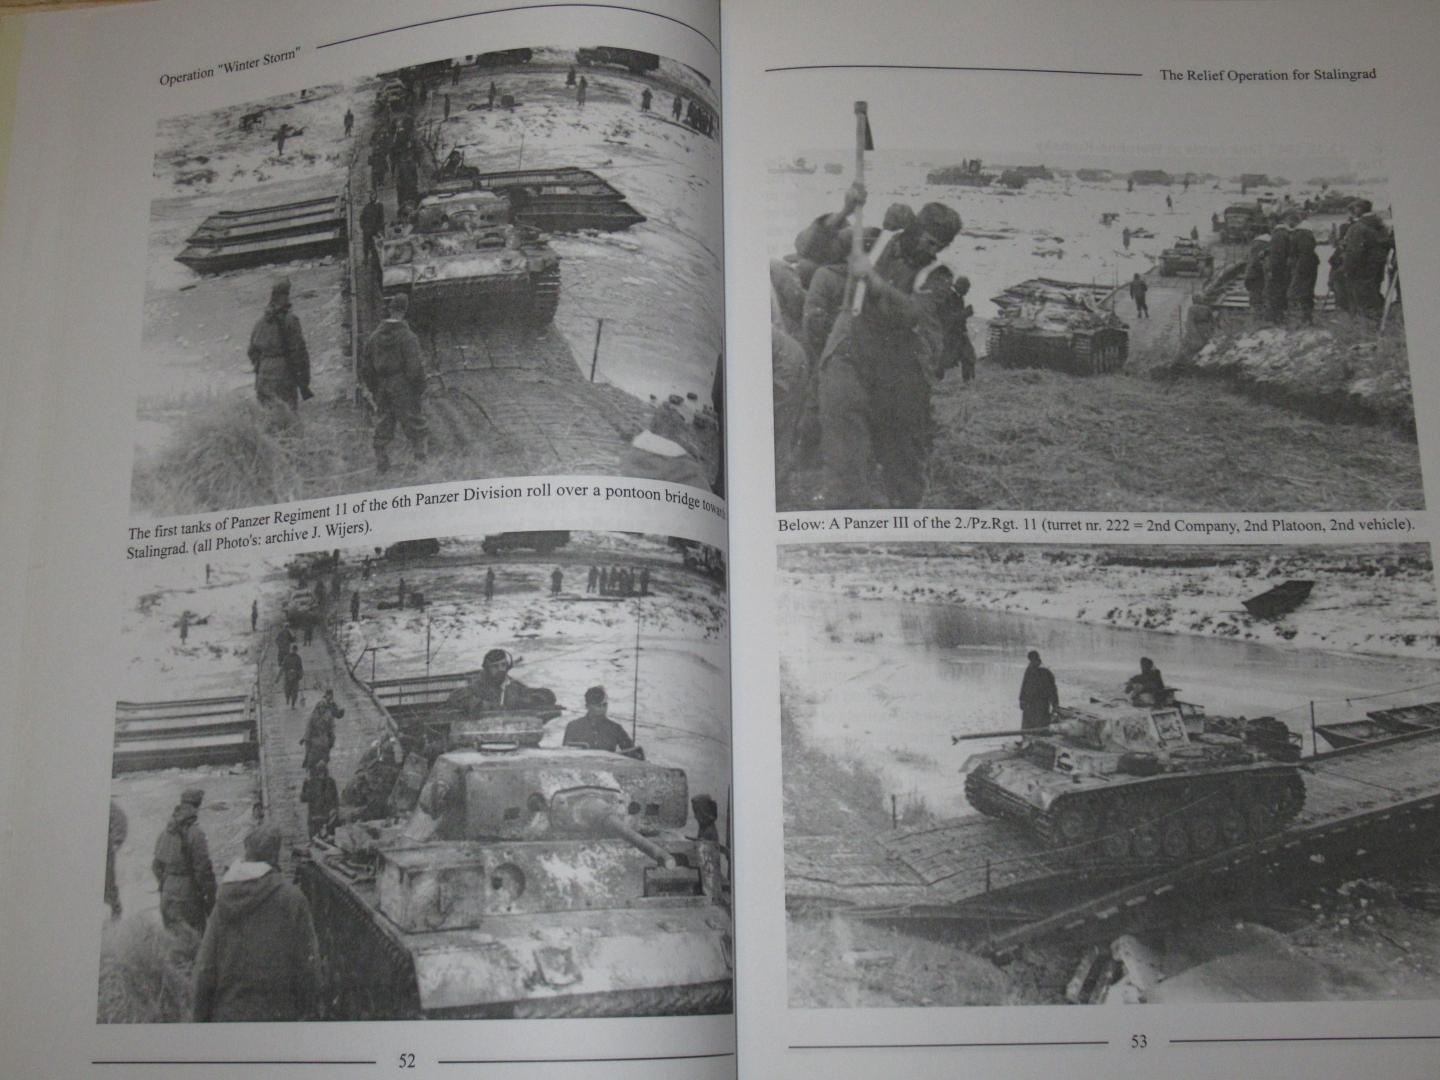 Wijers, Hans J. - The Battle for Stalingrad - Operation "Winter Storm" : The relief operation of the LVII Panzer Corps